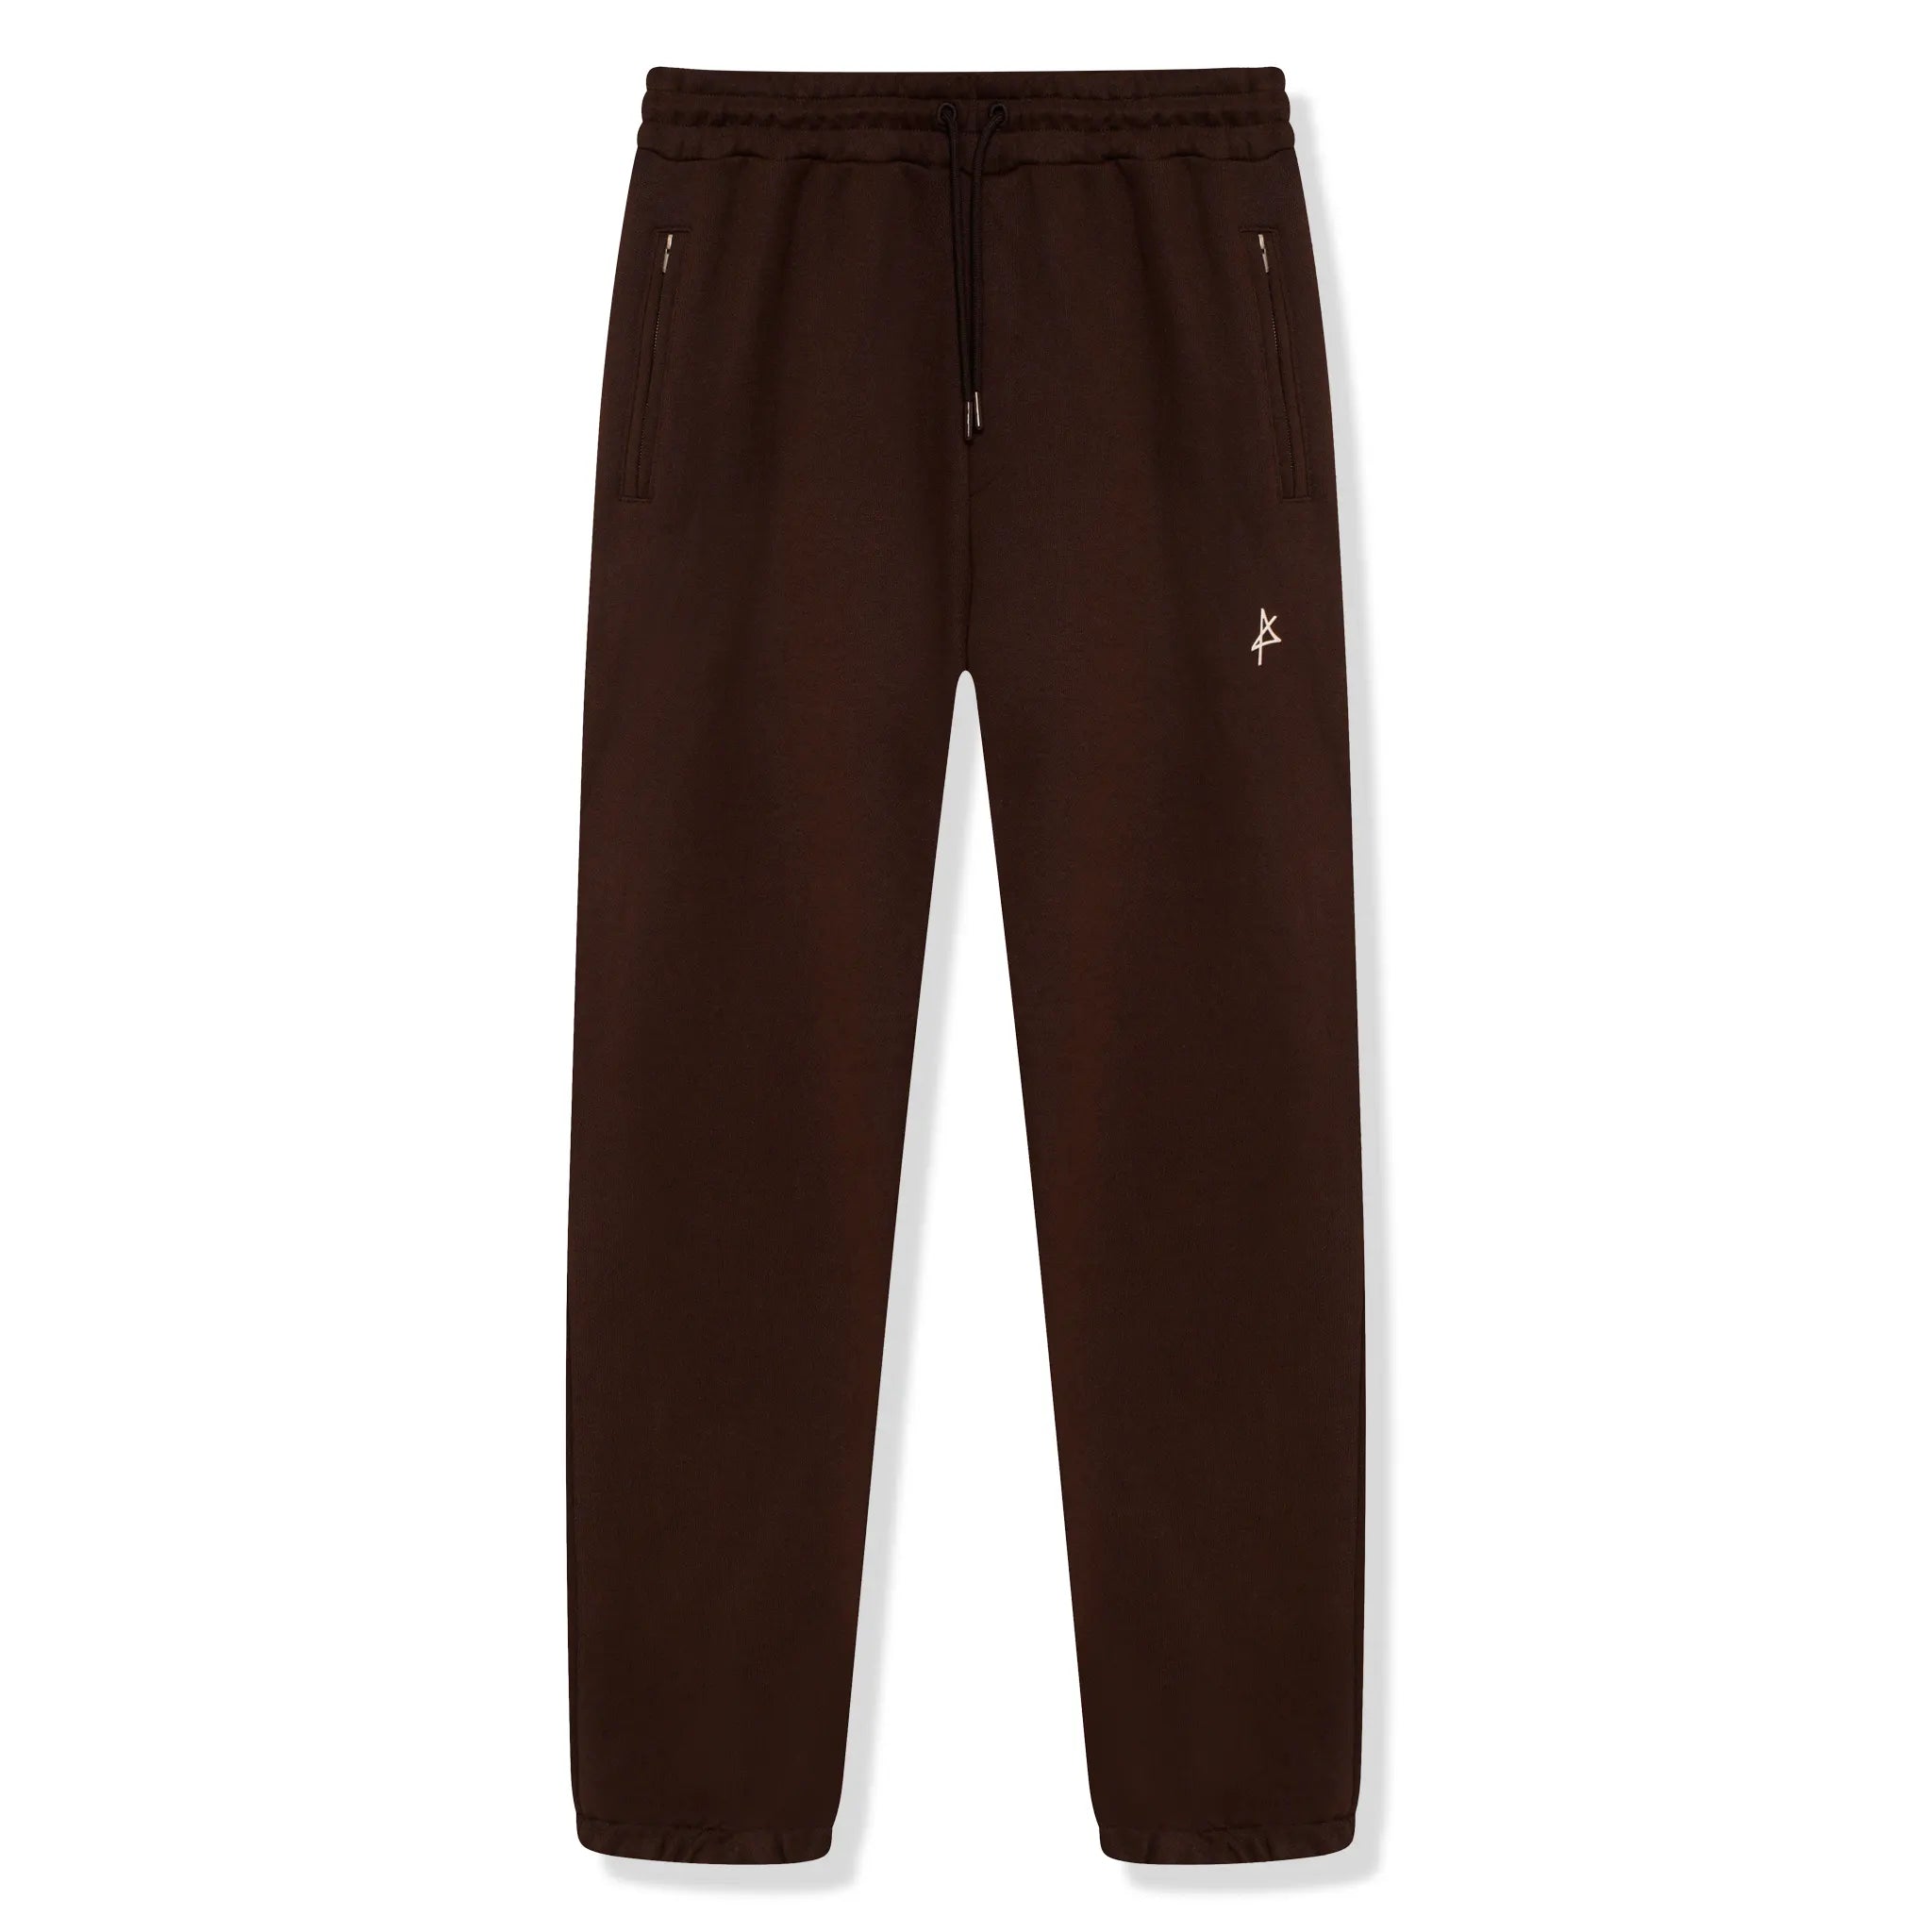 Front view of Amicci Brunello Brown Sweatpants